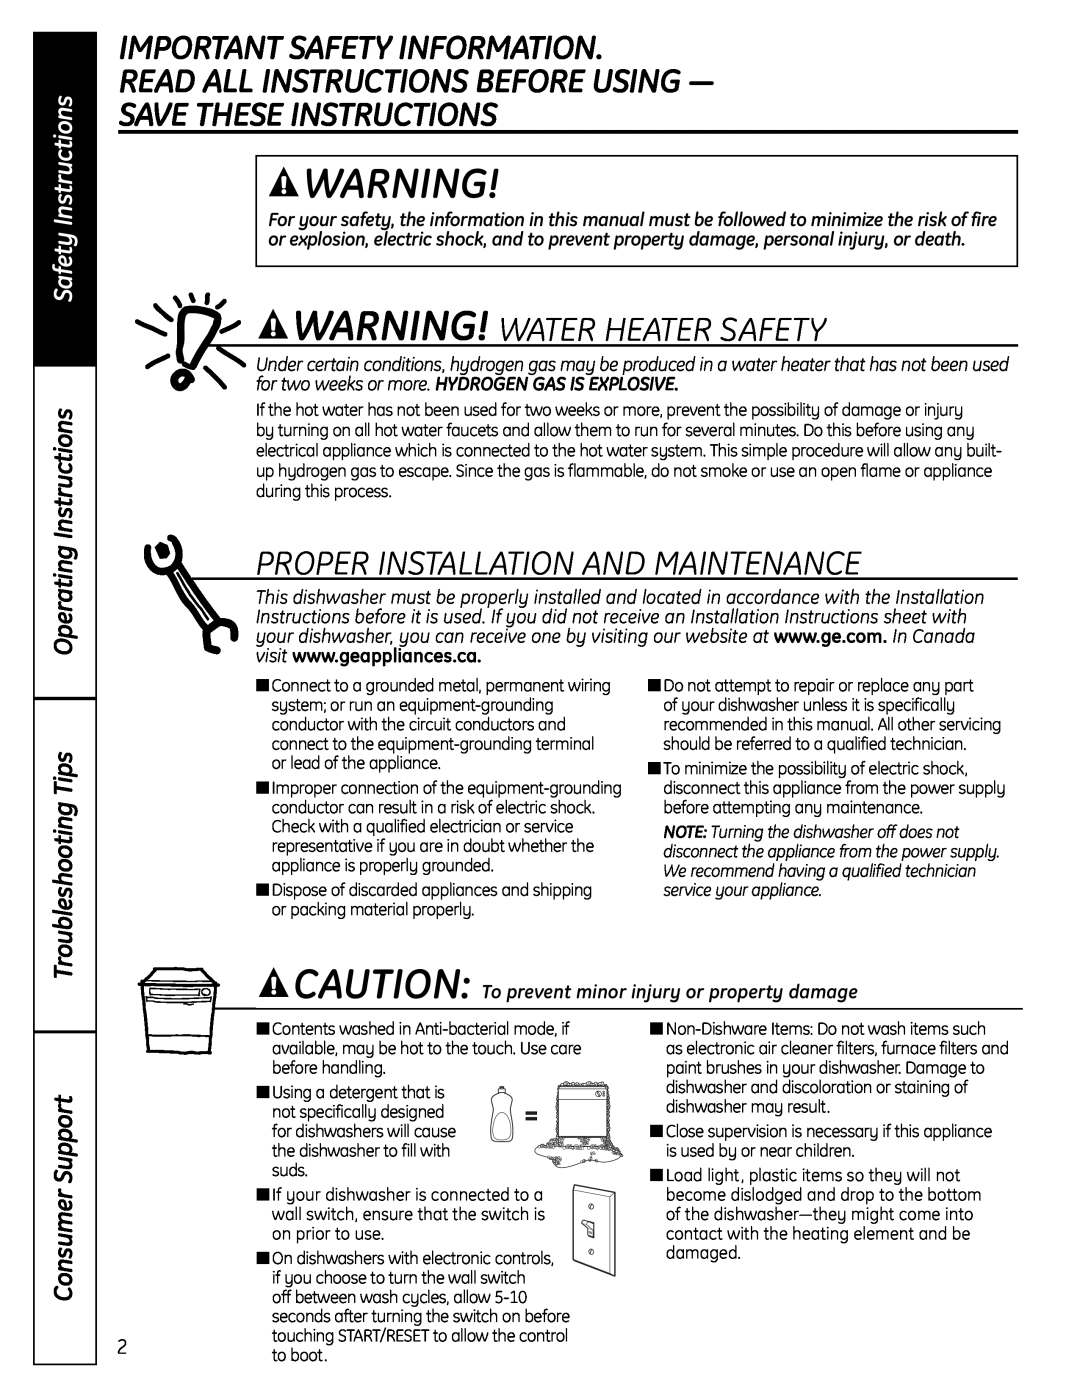 GE 165D4700P382 owner manual Important Safety Information, Read All Instructions Before Using, Save These Instructions 